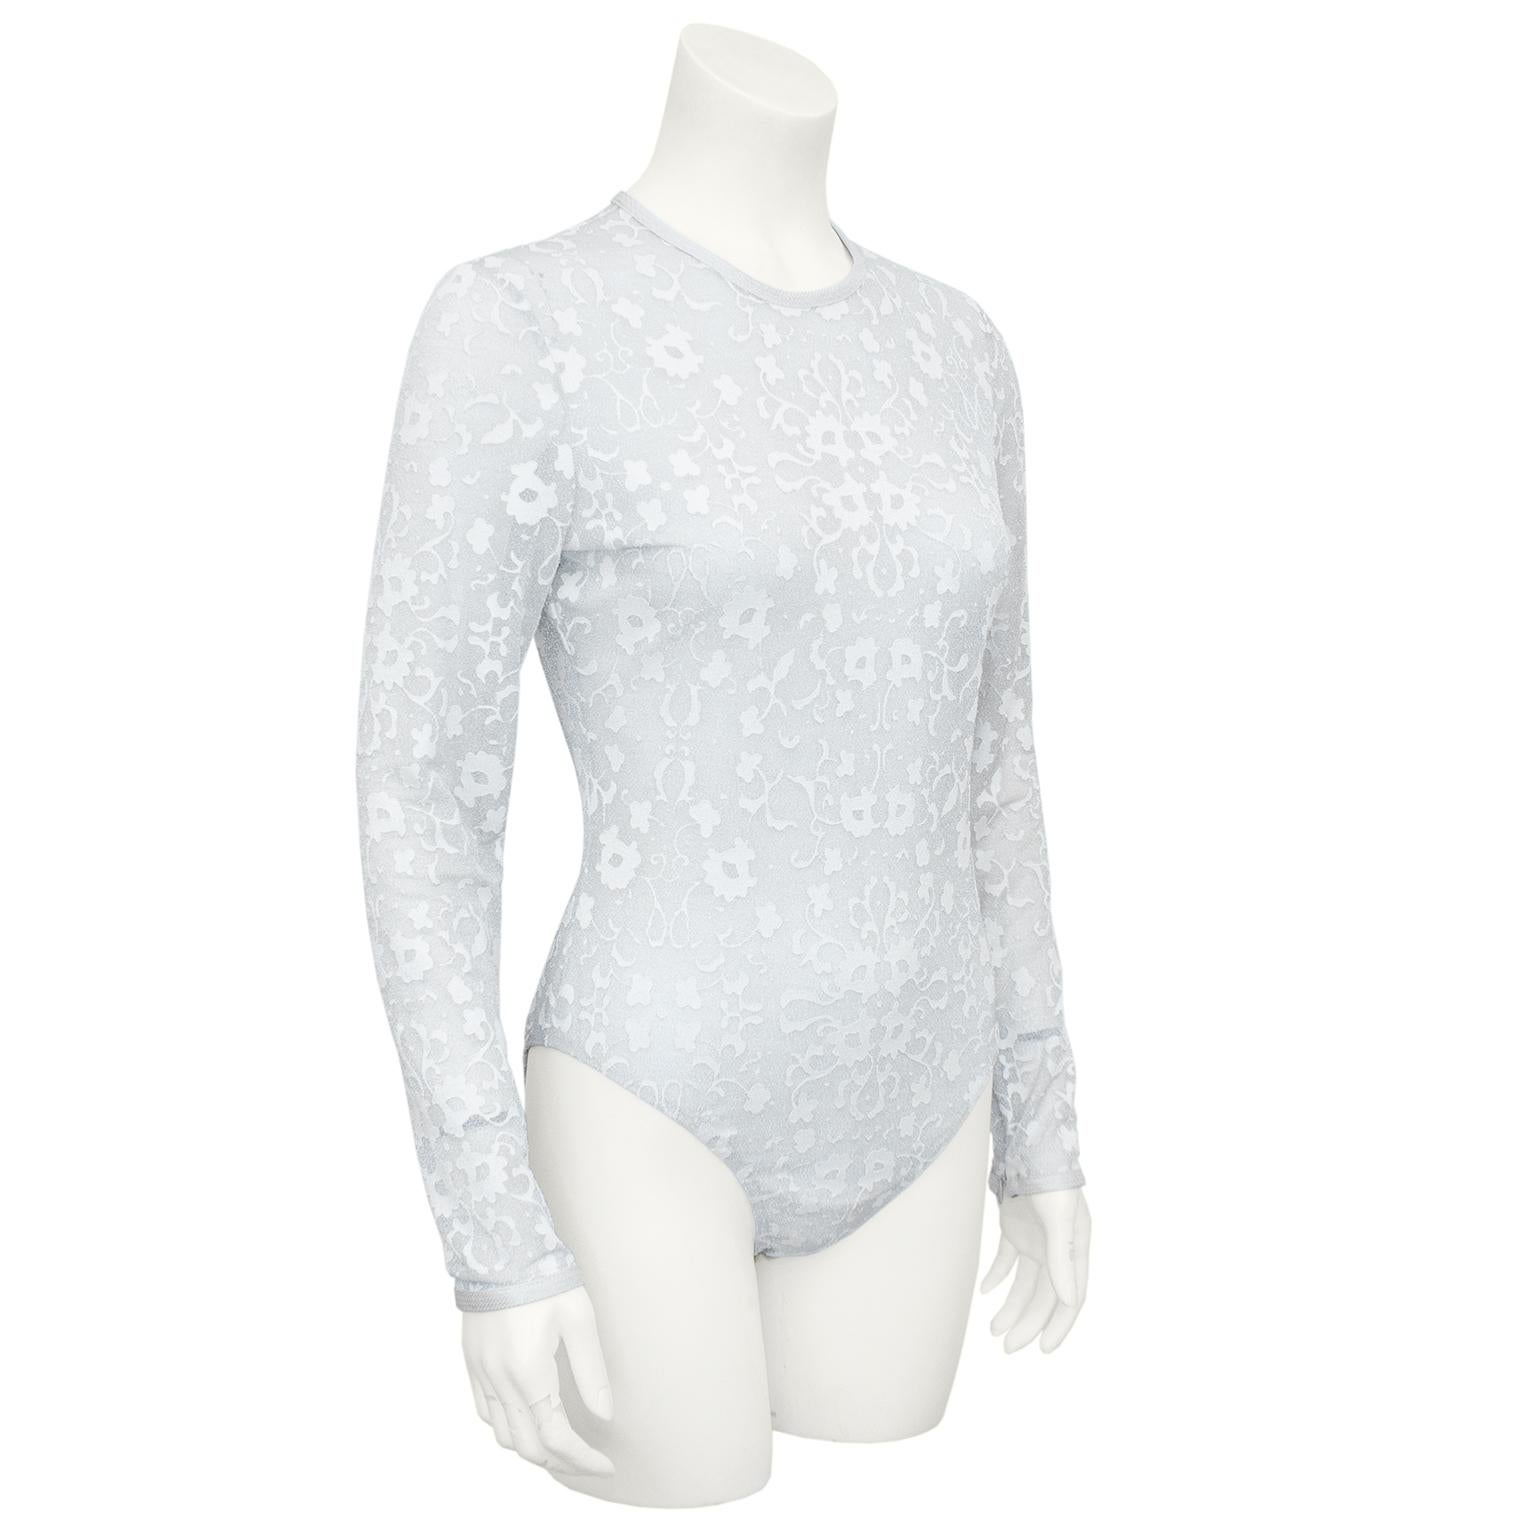 1990s Gianni Versace bodysuit. Sheer lurex lace with silver metallic bits throughout and silver trim with tonal top stitching. Little bit of stretch. Invisible zipper up centre back and hook and eye closures at bottom. Small zipper slits at wrists